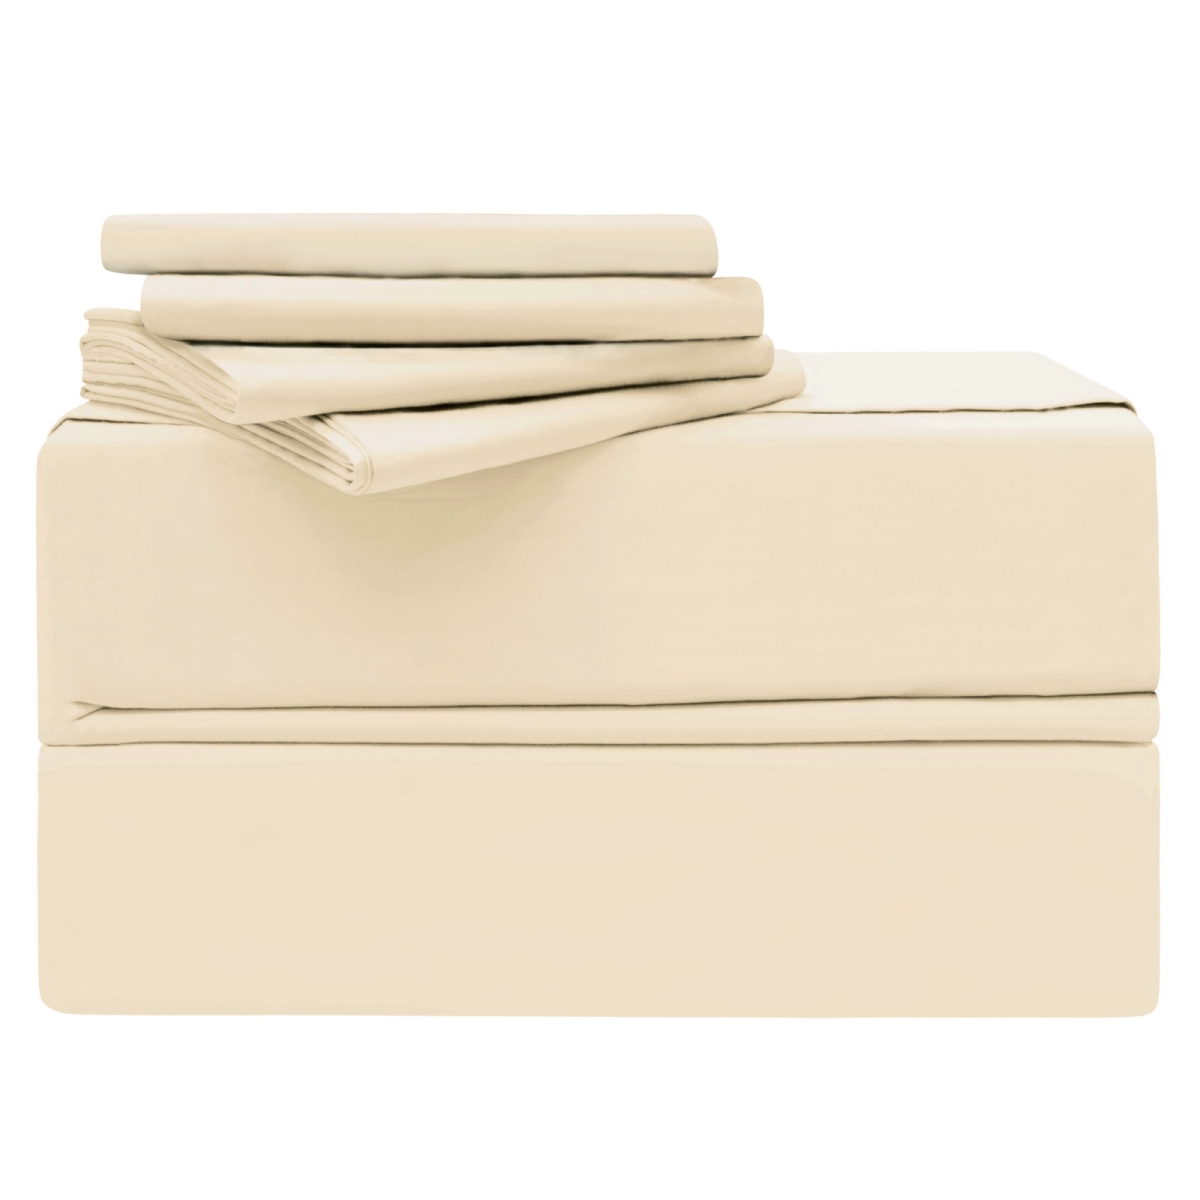 Yms008197 Luxury 620 Thread Count 100 Percent Cotton Sheet Set, Ivory - California King - 6 Piece